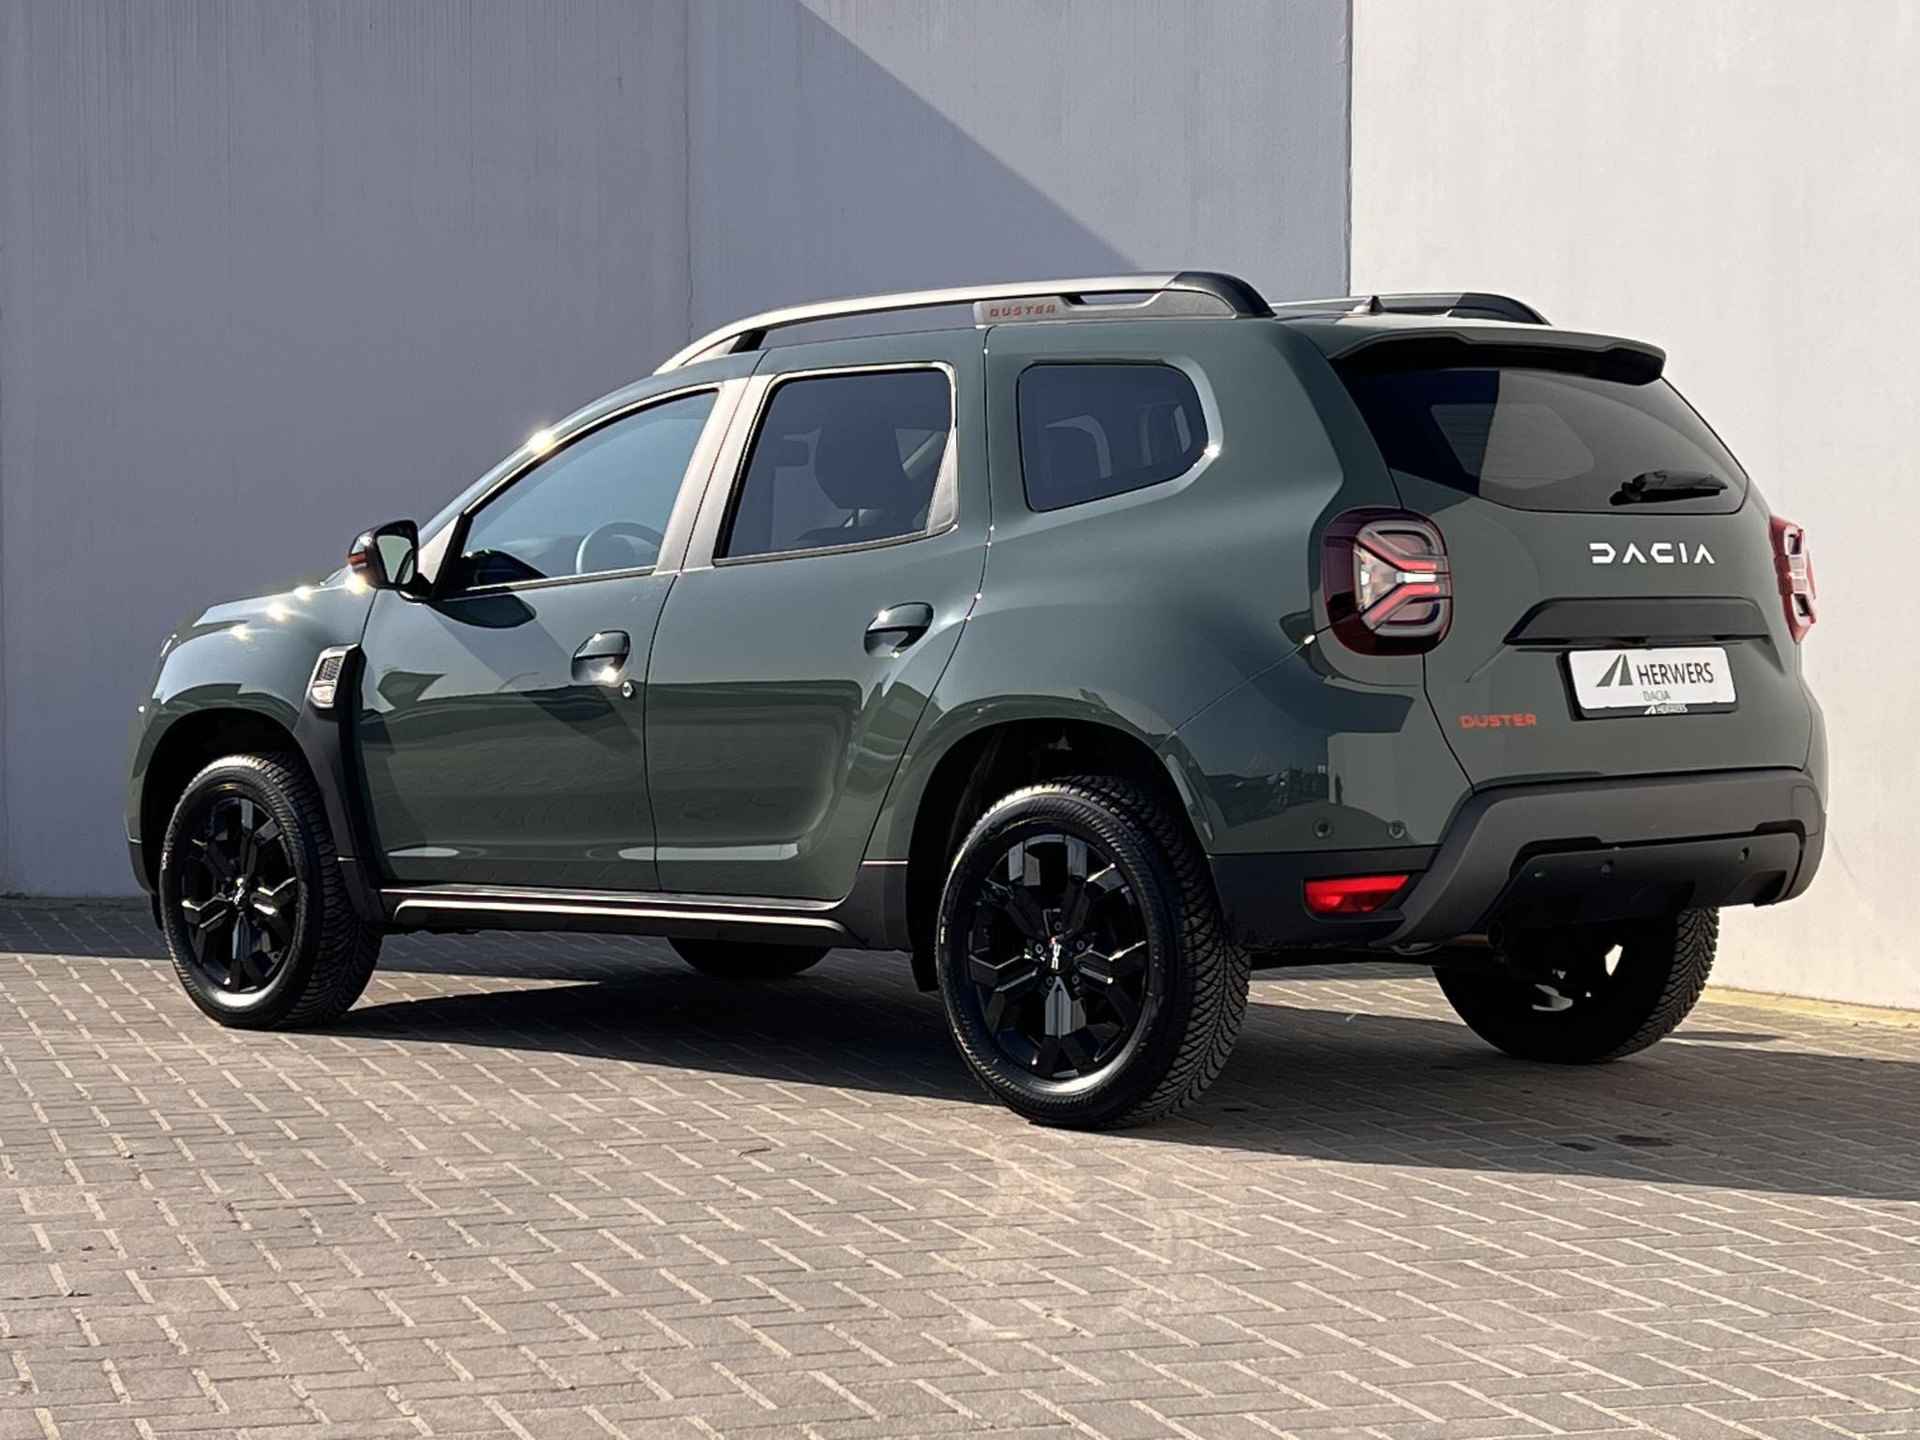 Dacia Duster 1.3 TCe 150 Extreme Automaat / Navigatie / Camera 360° / Apple Carplay Android / All Season banden / - 22/49